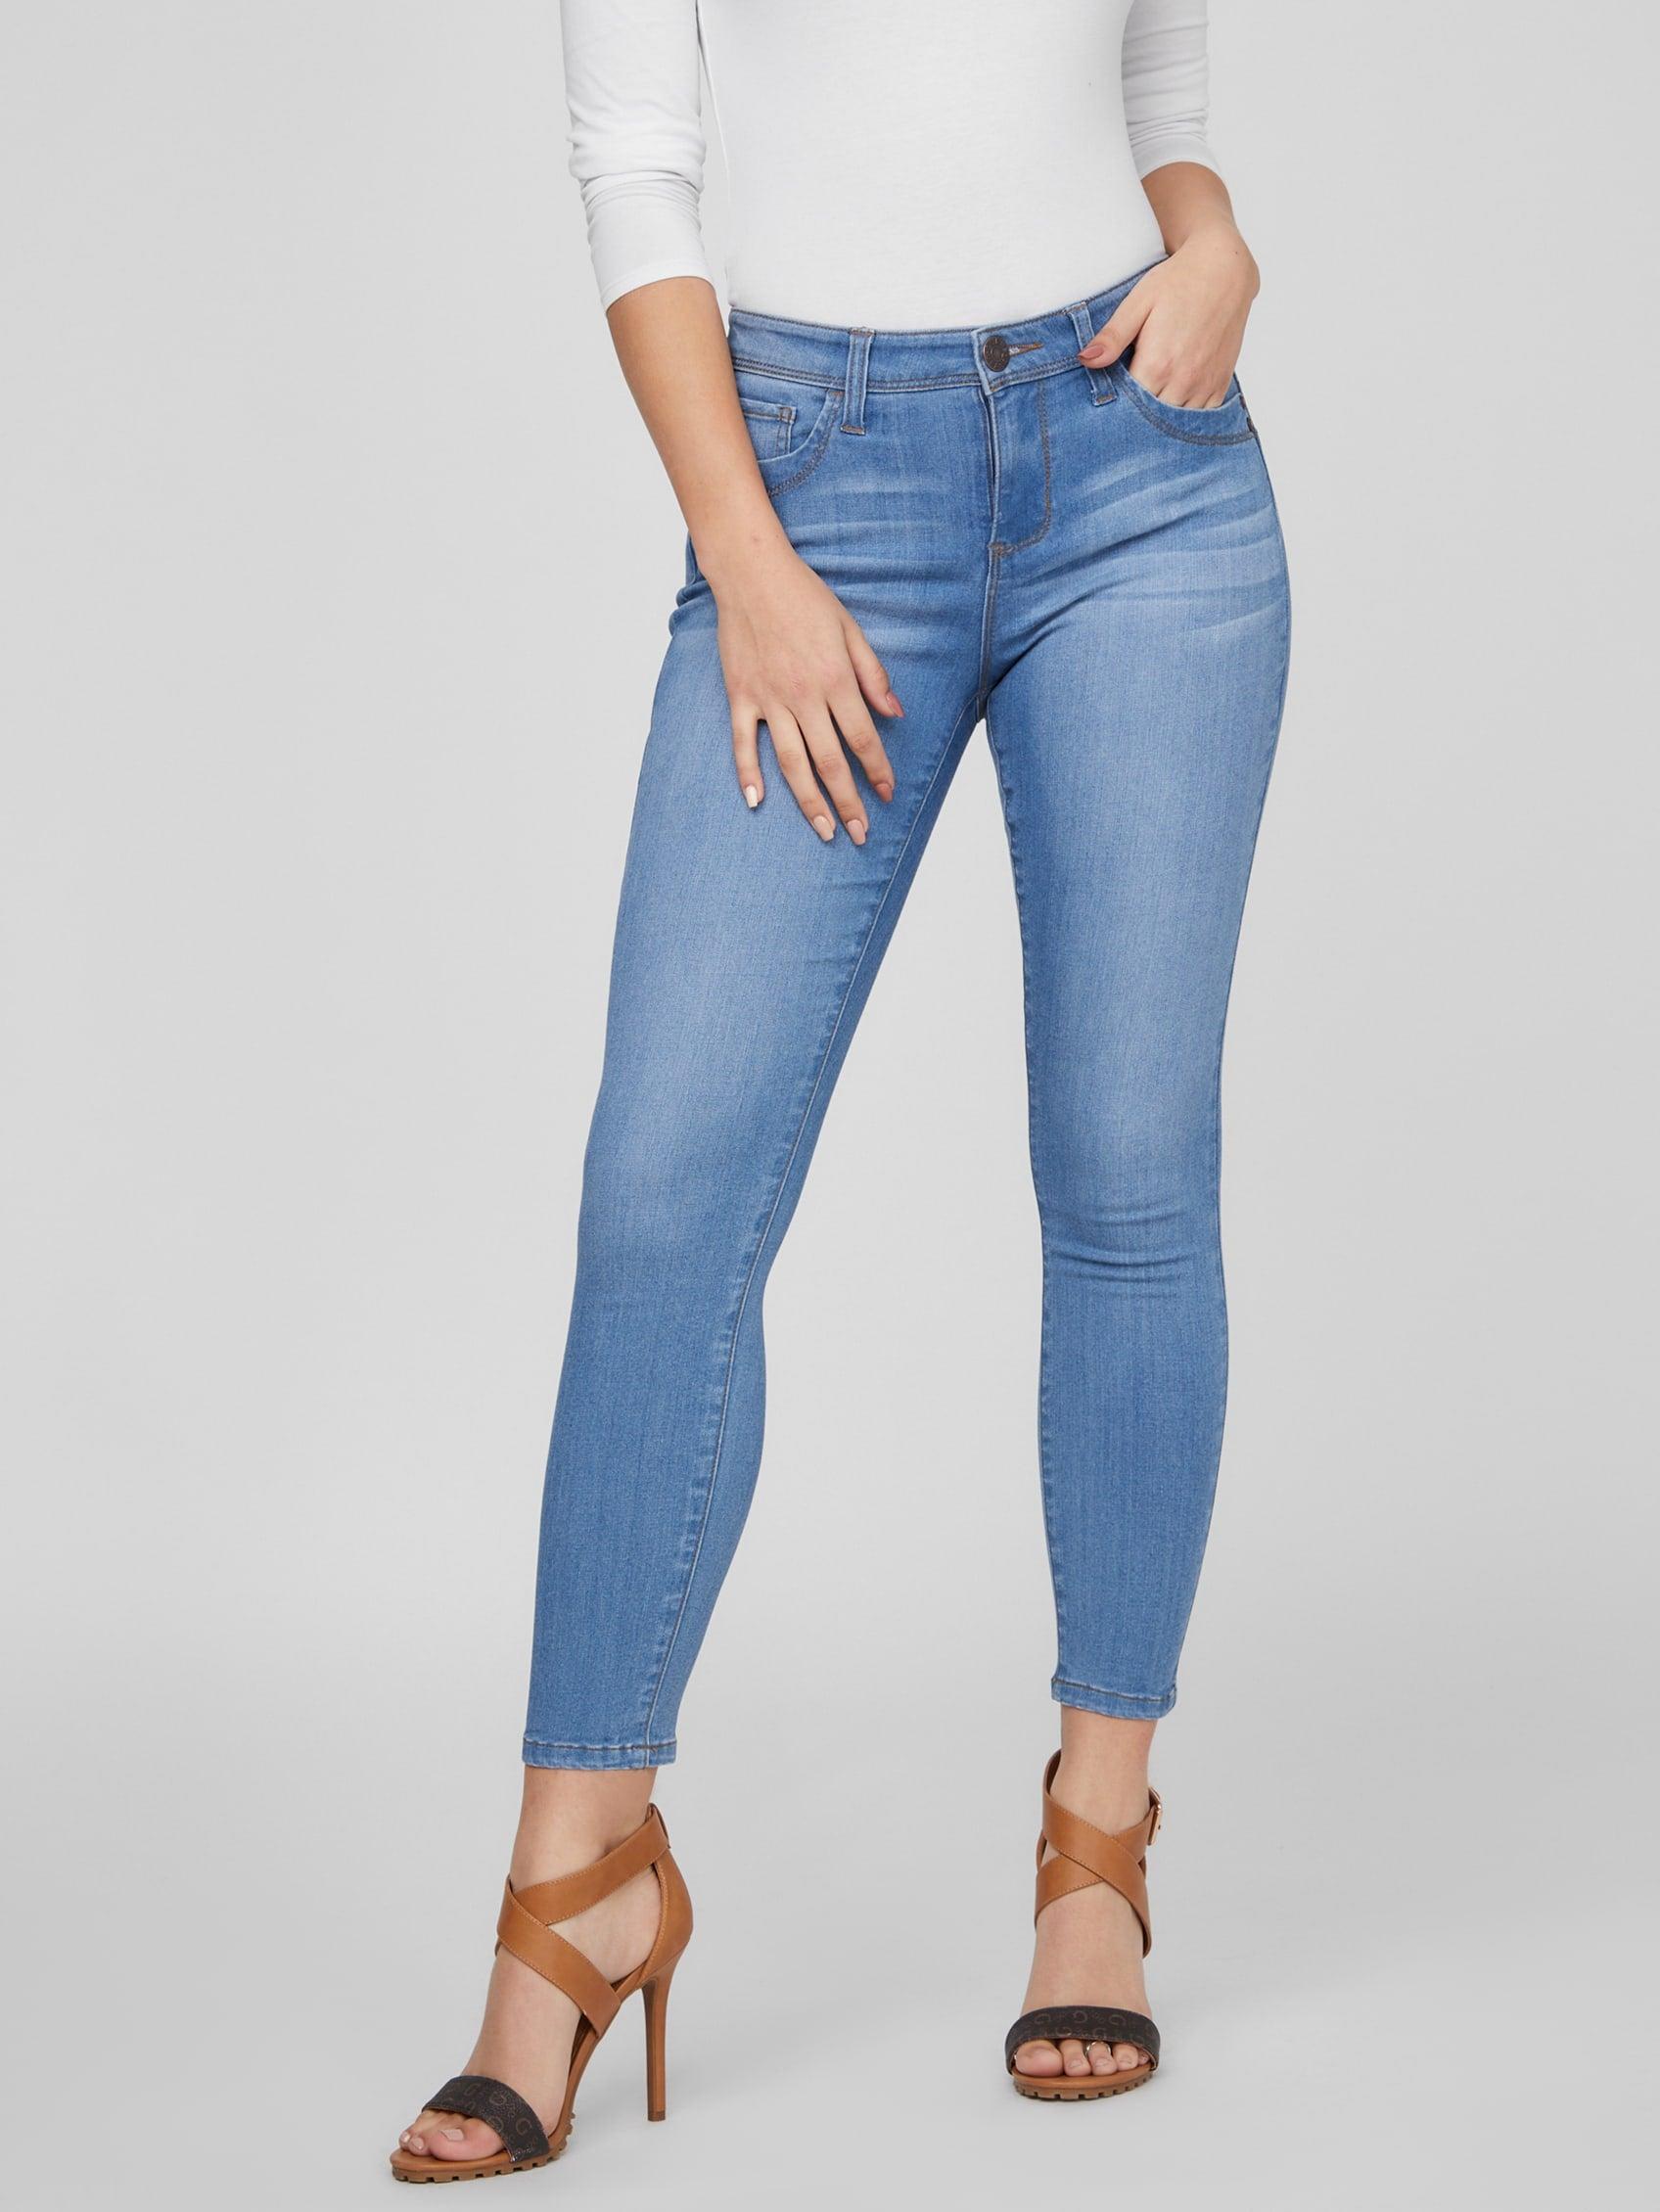 Guess Factory Beyla Curvy Mid-rise Skinny Jeans in Blue | Lyst